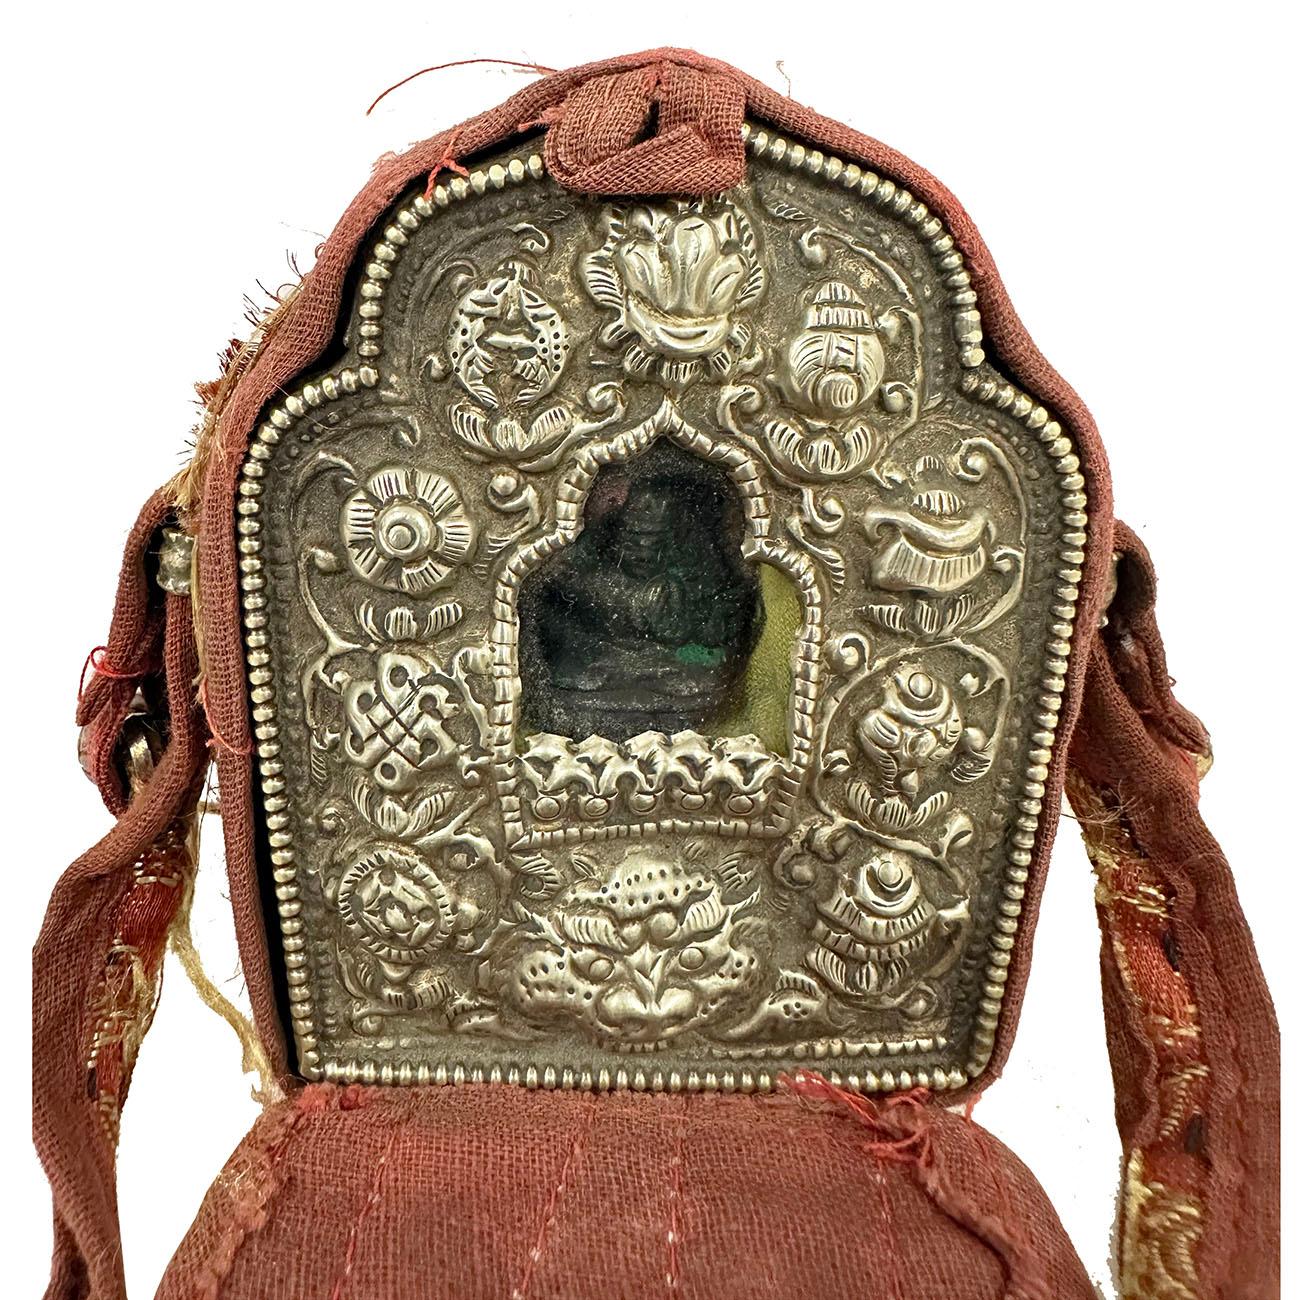 Ghau is a small prayer box worn as pendant by Buddhists as portable shrines which can be pray by prayer during their travel. This Ghau prayer box (travel Buddha shrine) made from Tibetan silver with a Buddha inside all wrapped in a hand embroidered